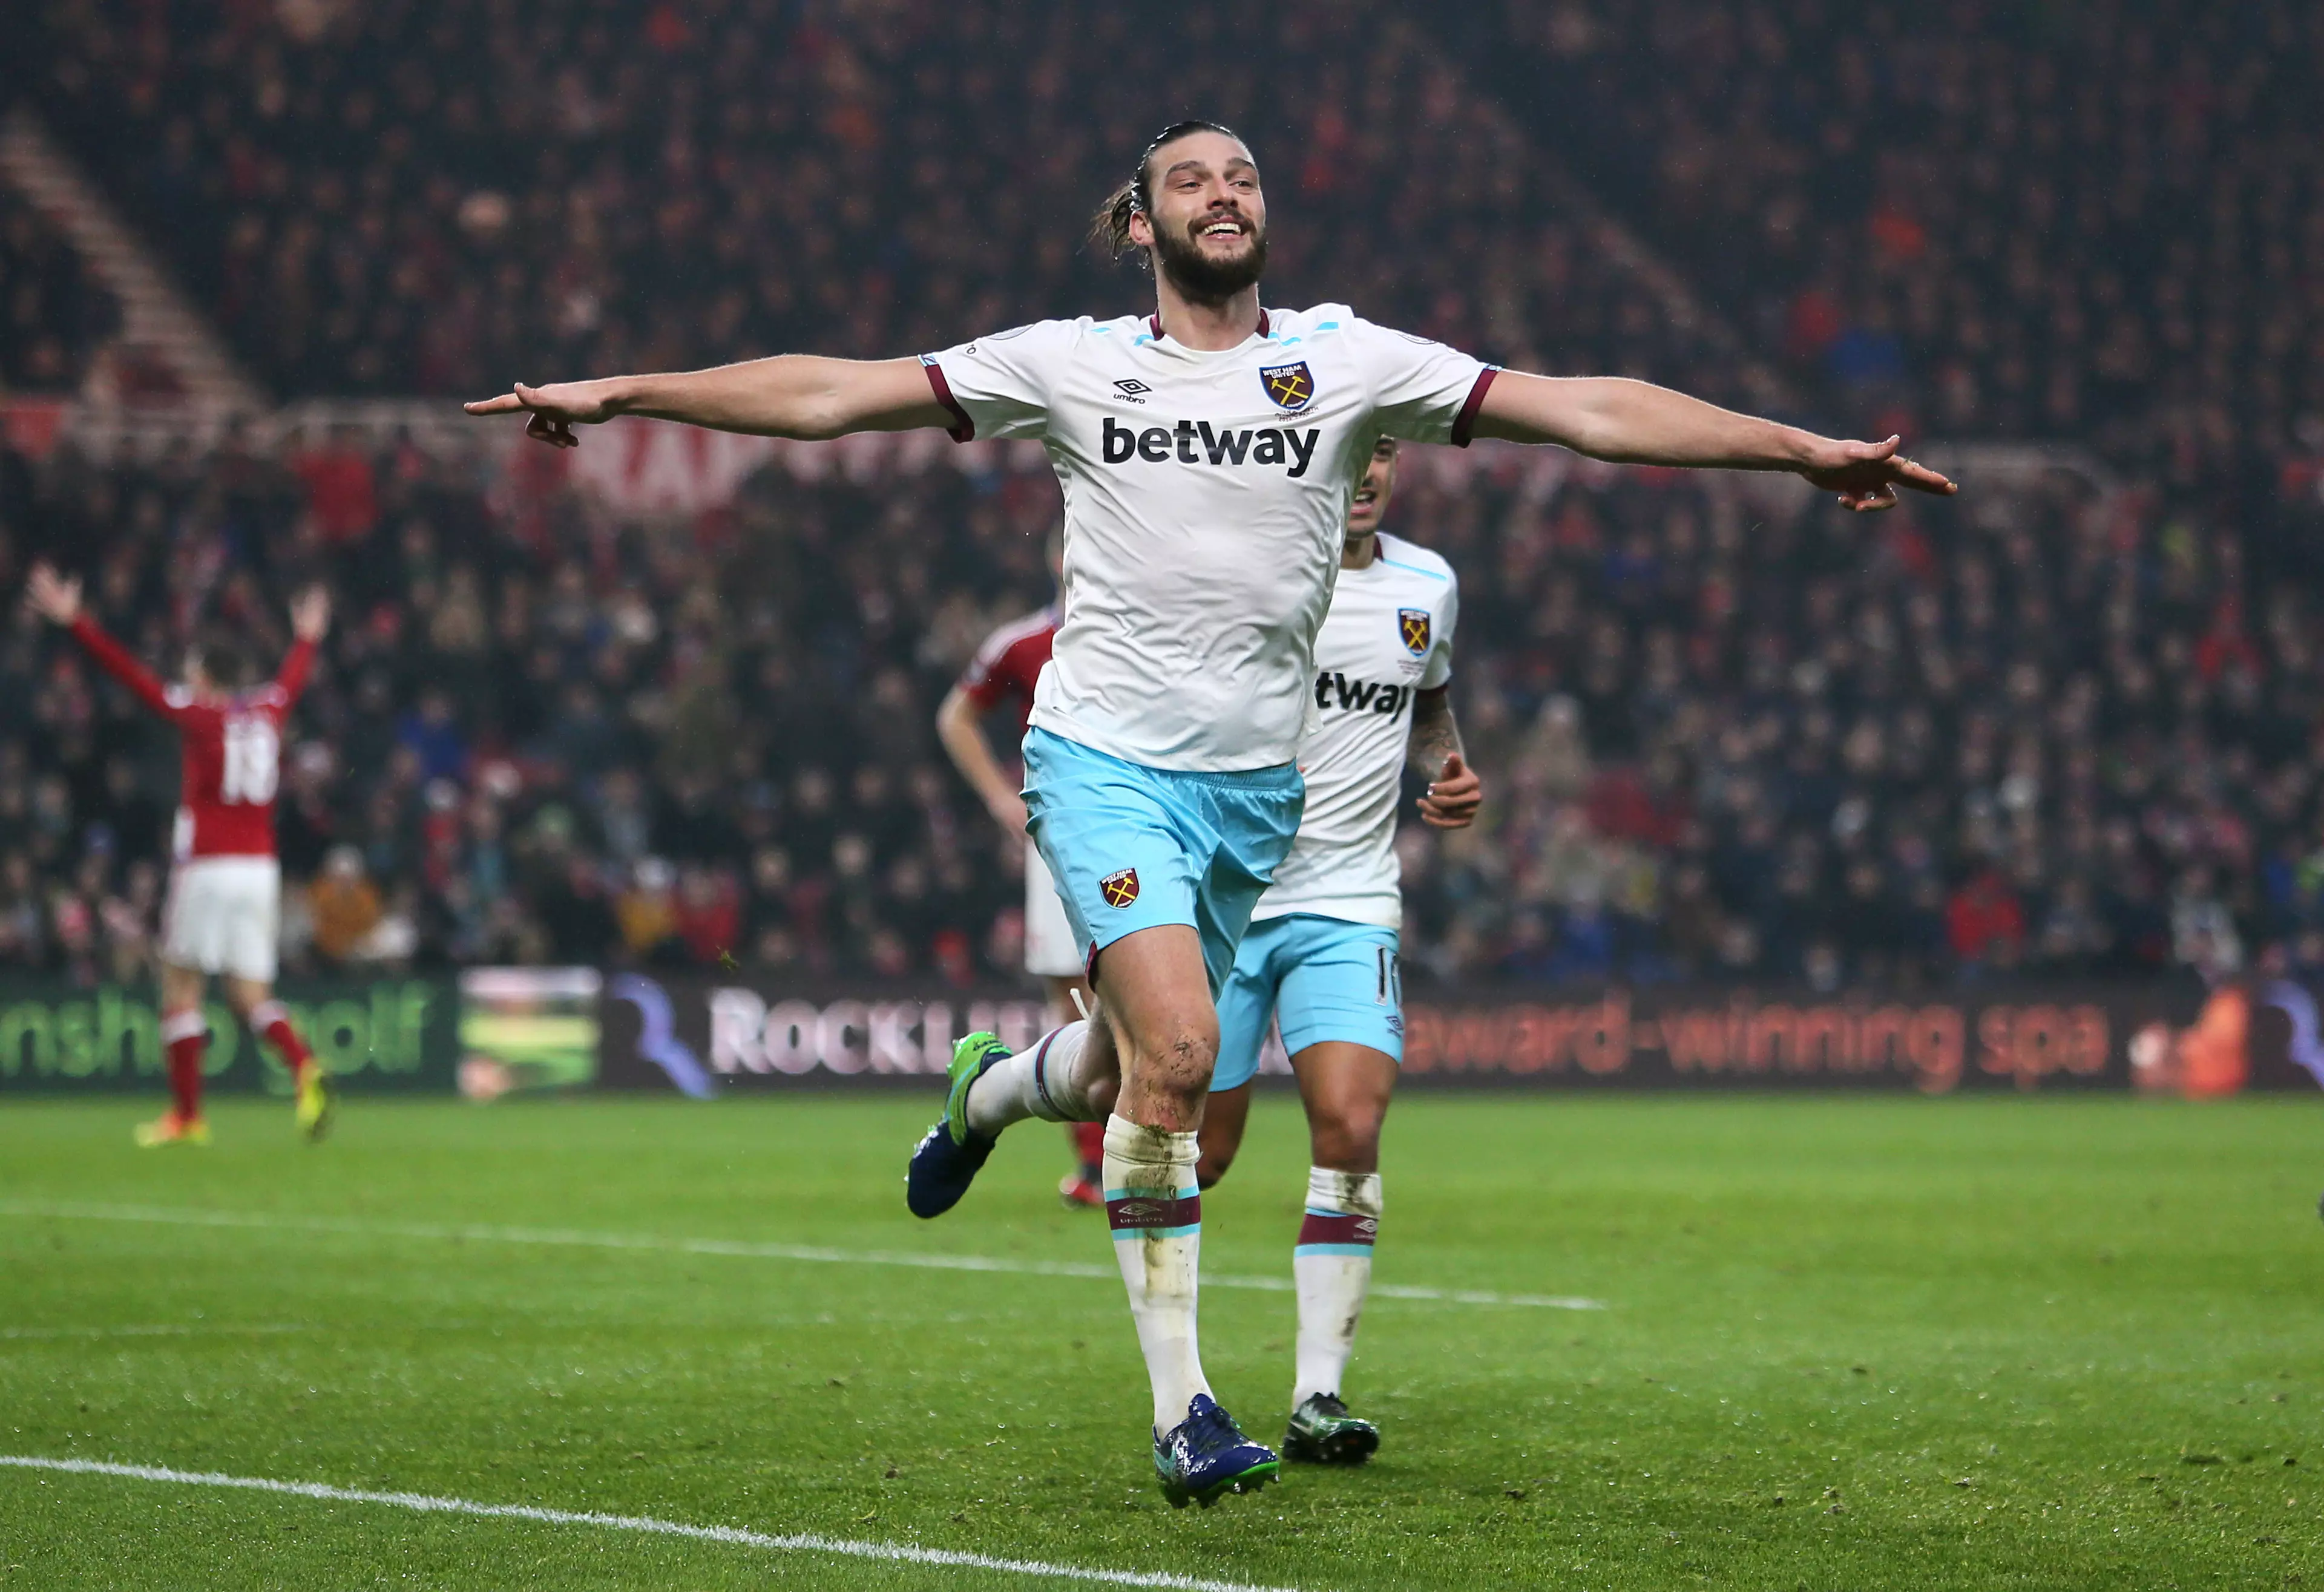 West Ham Boss Slaven Bilic Makes A Big Claim About Andy Carroll